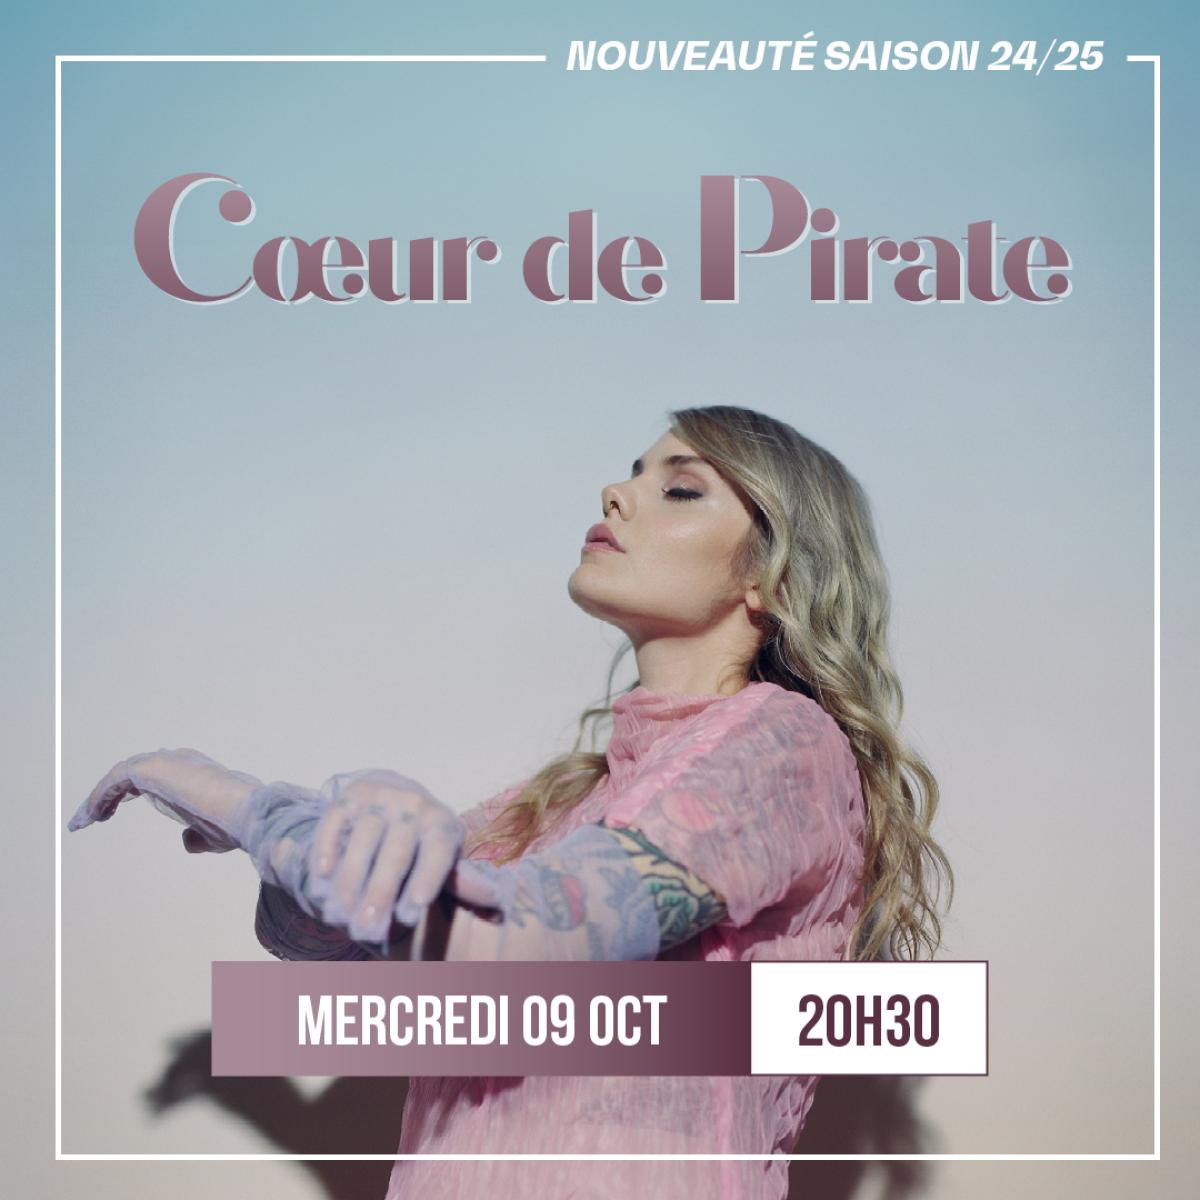 Coeur de Pirate at Le Pin Galant Tickets